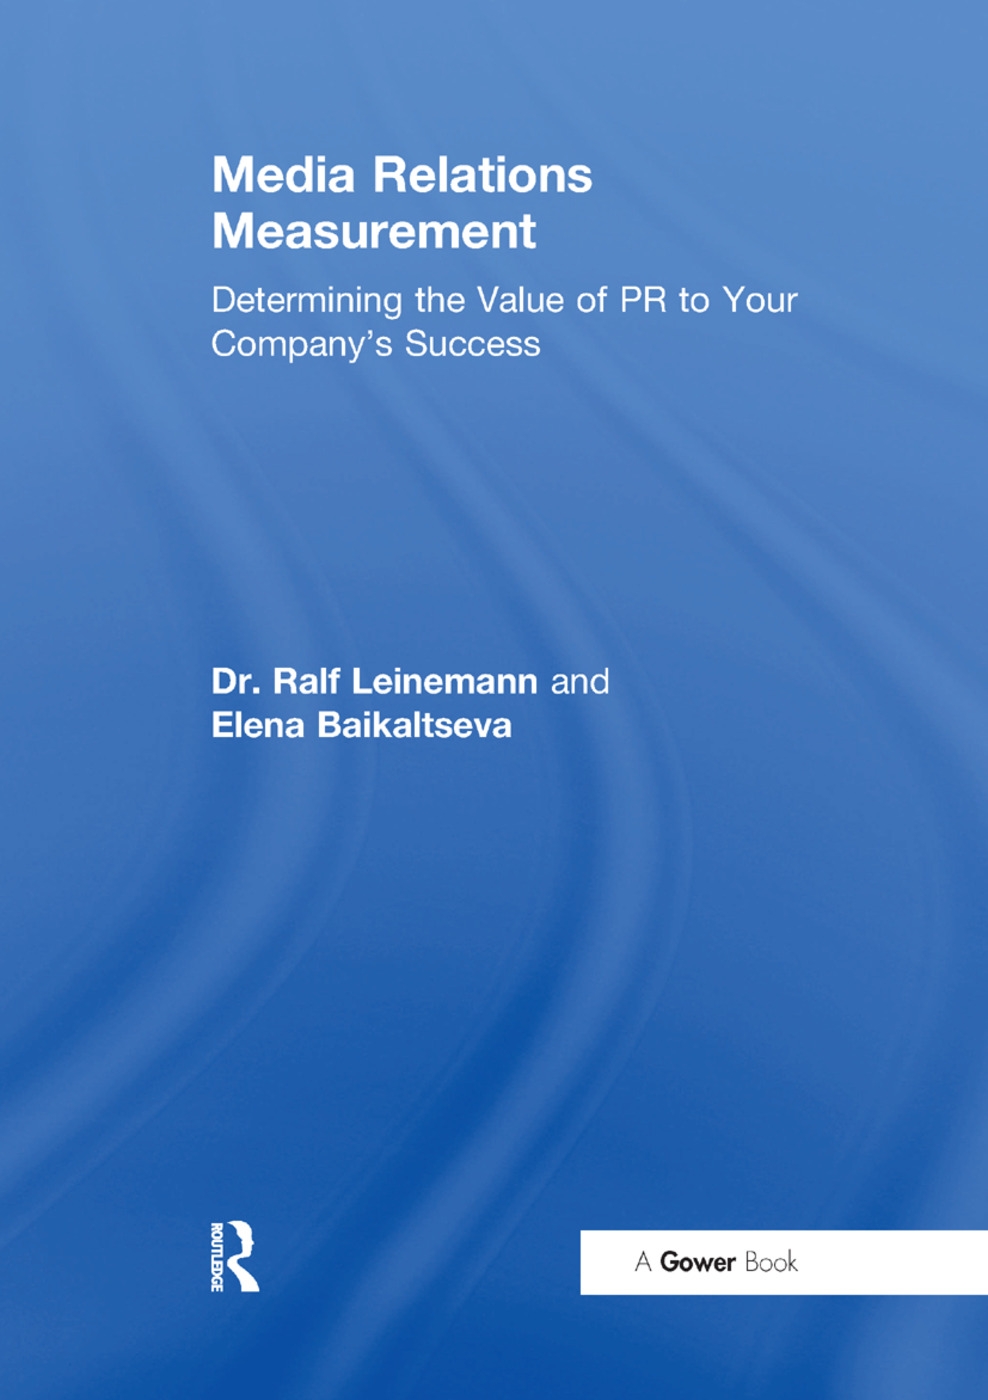 Media Relations Measurement: Determining the Value of PR to Your Company’s Success